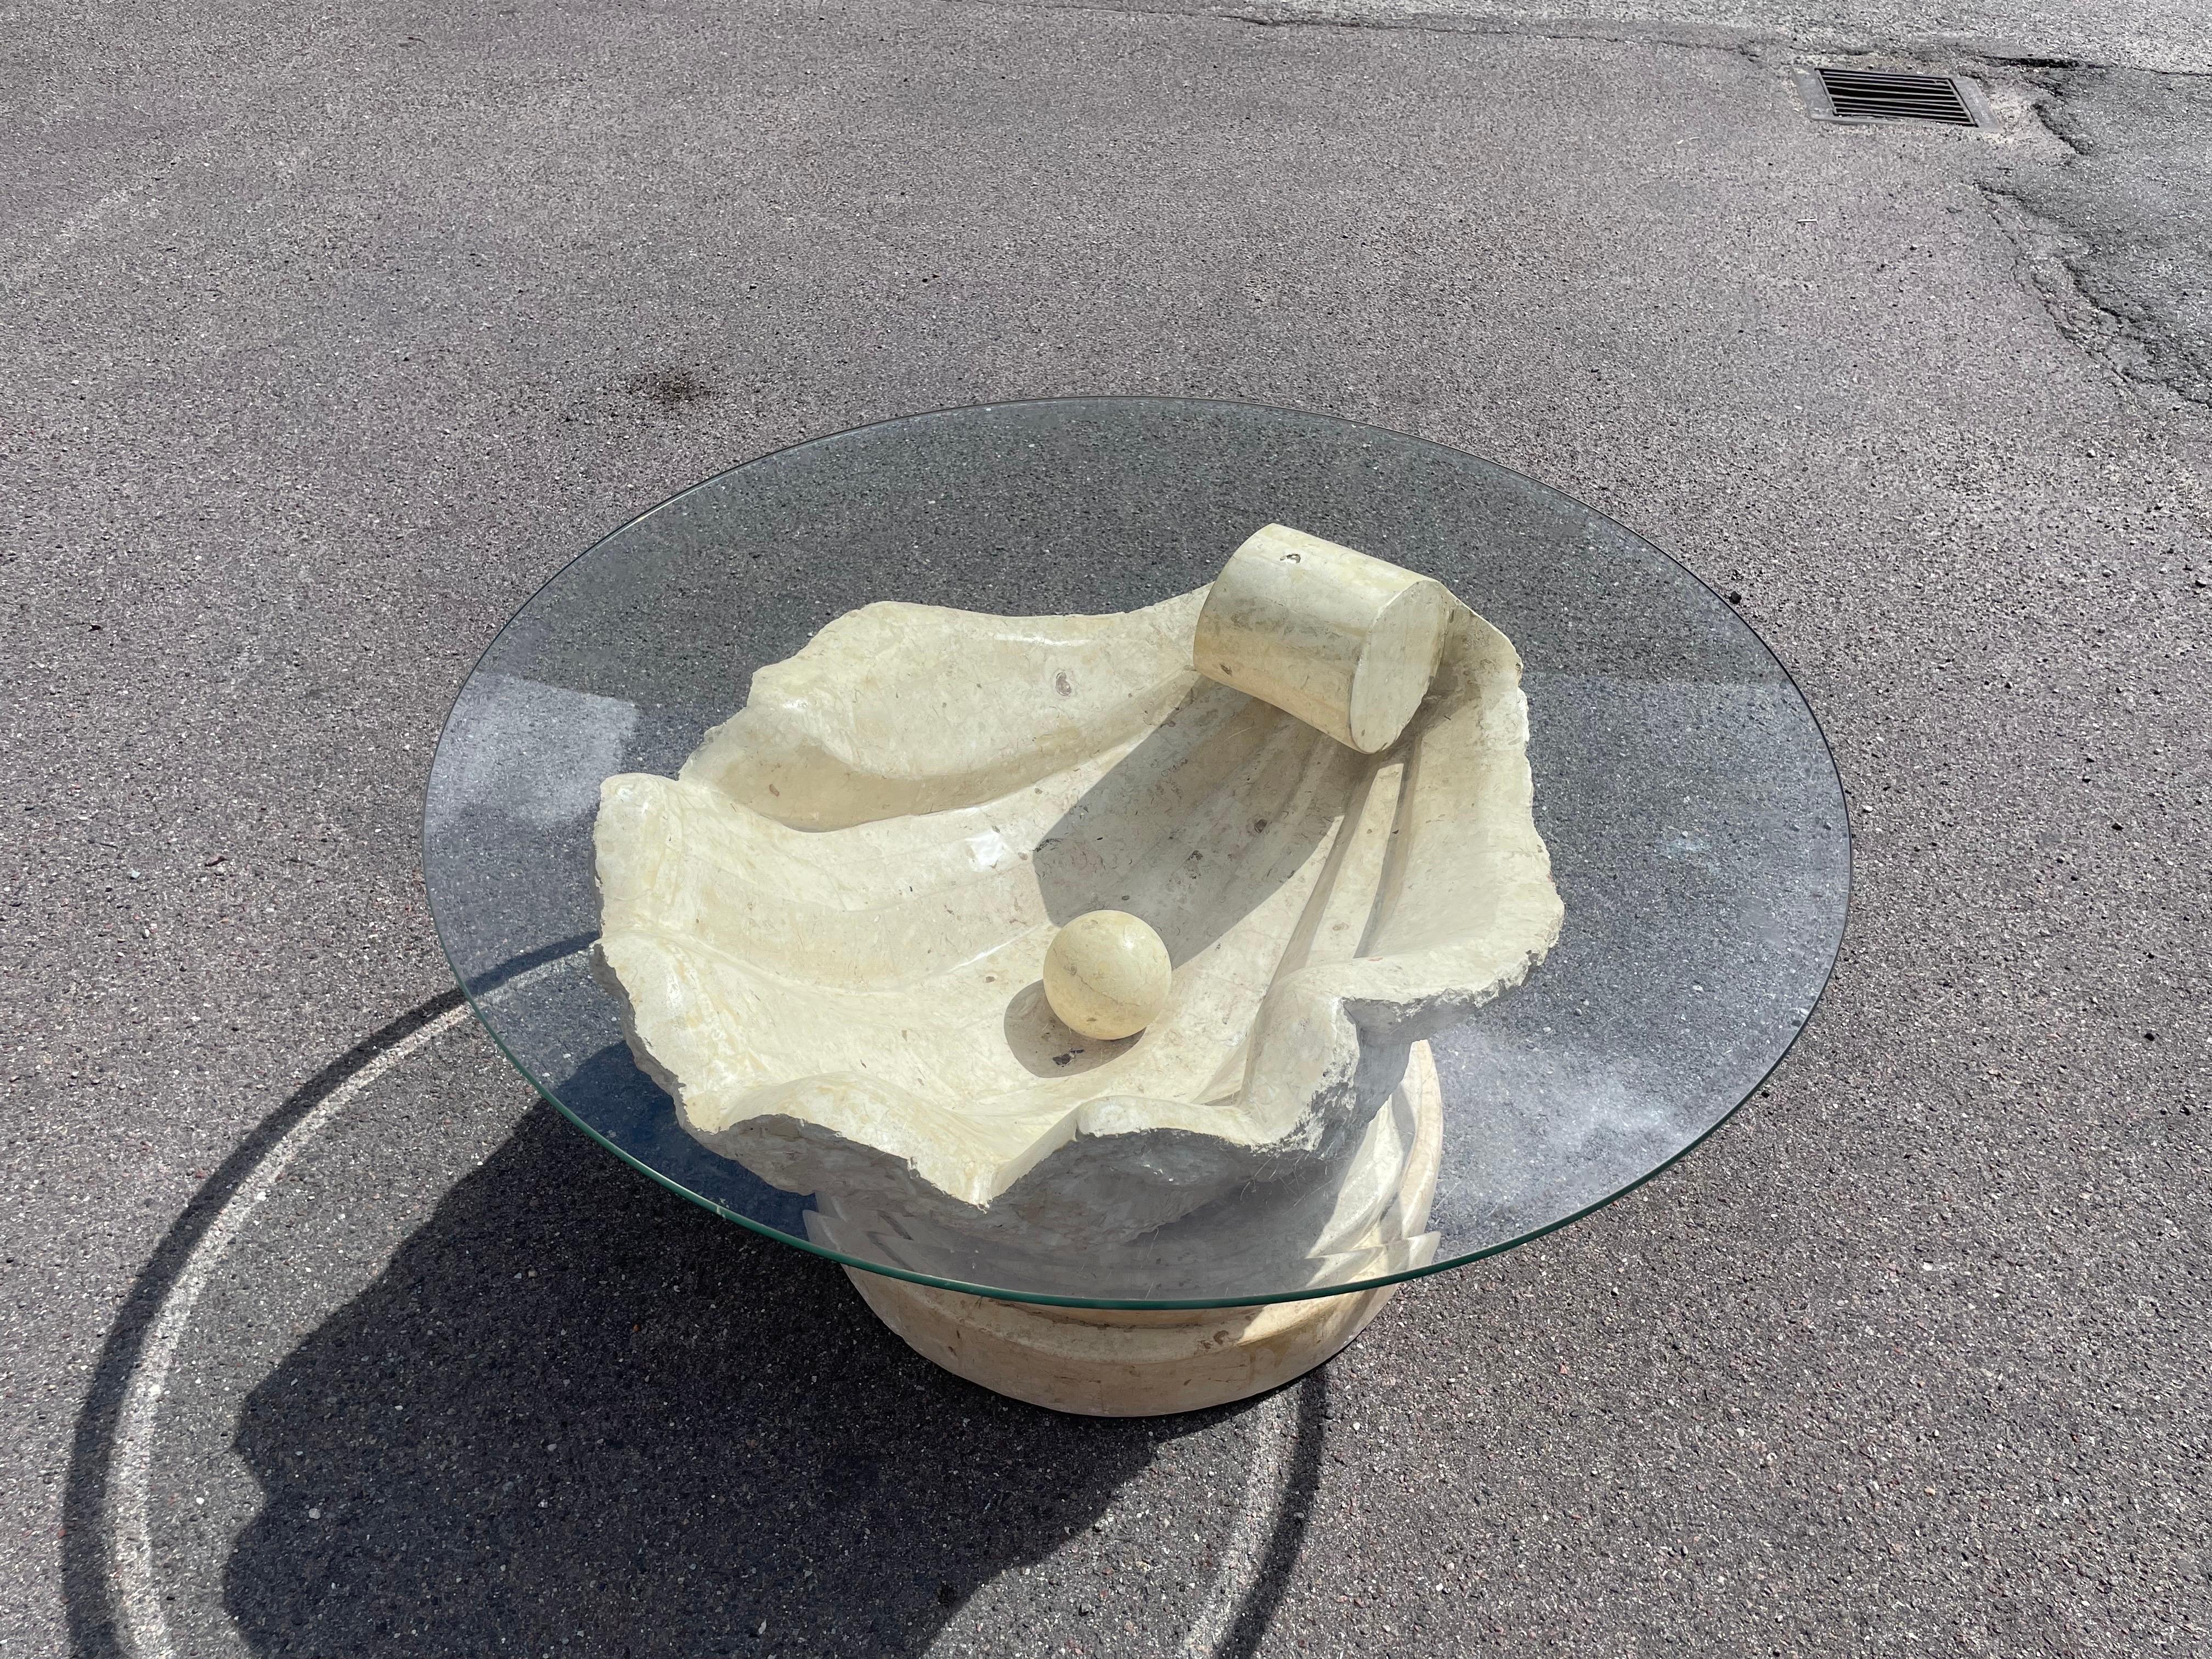 Italian Stunning coffee table by Magnussen Ponte, 1980s from exquisite Mactan stone